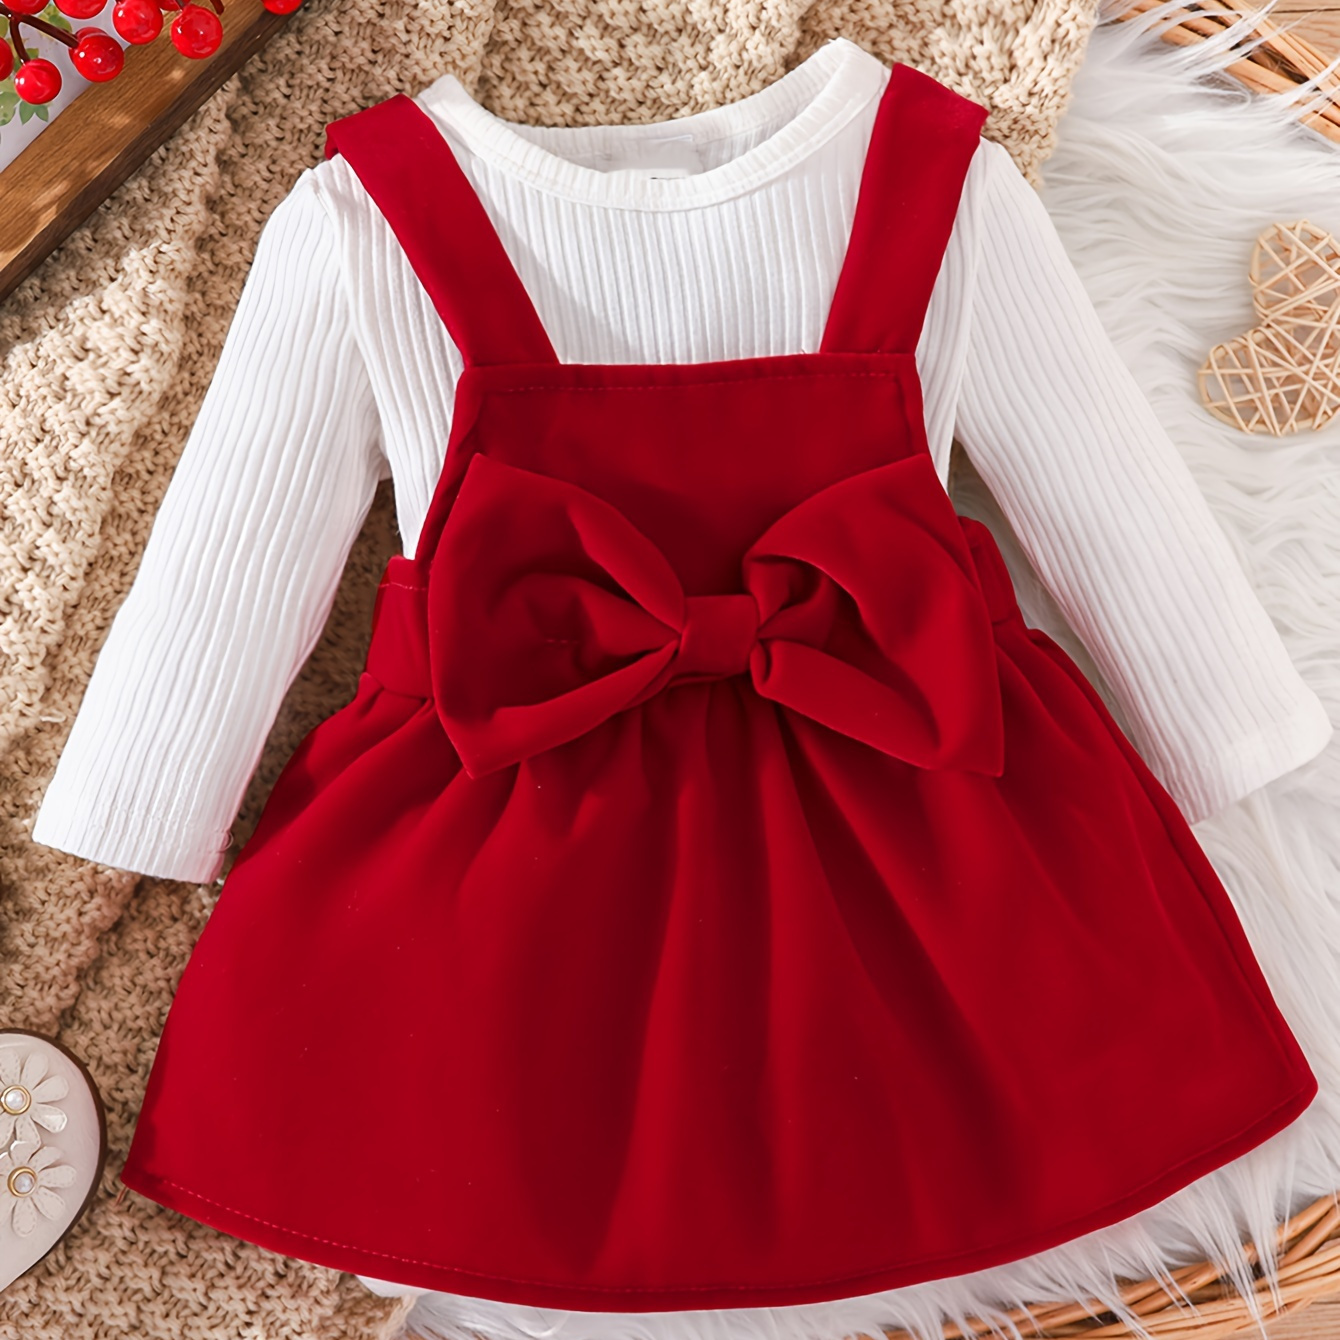 

Toddler Baby Girl Spring And Autumn Long-sleeved Triangle Romper Top Bowknot Suspender Skirt Set Chrismas 2pcs Outfit